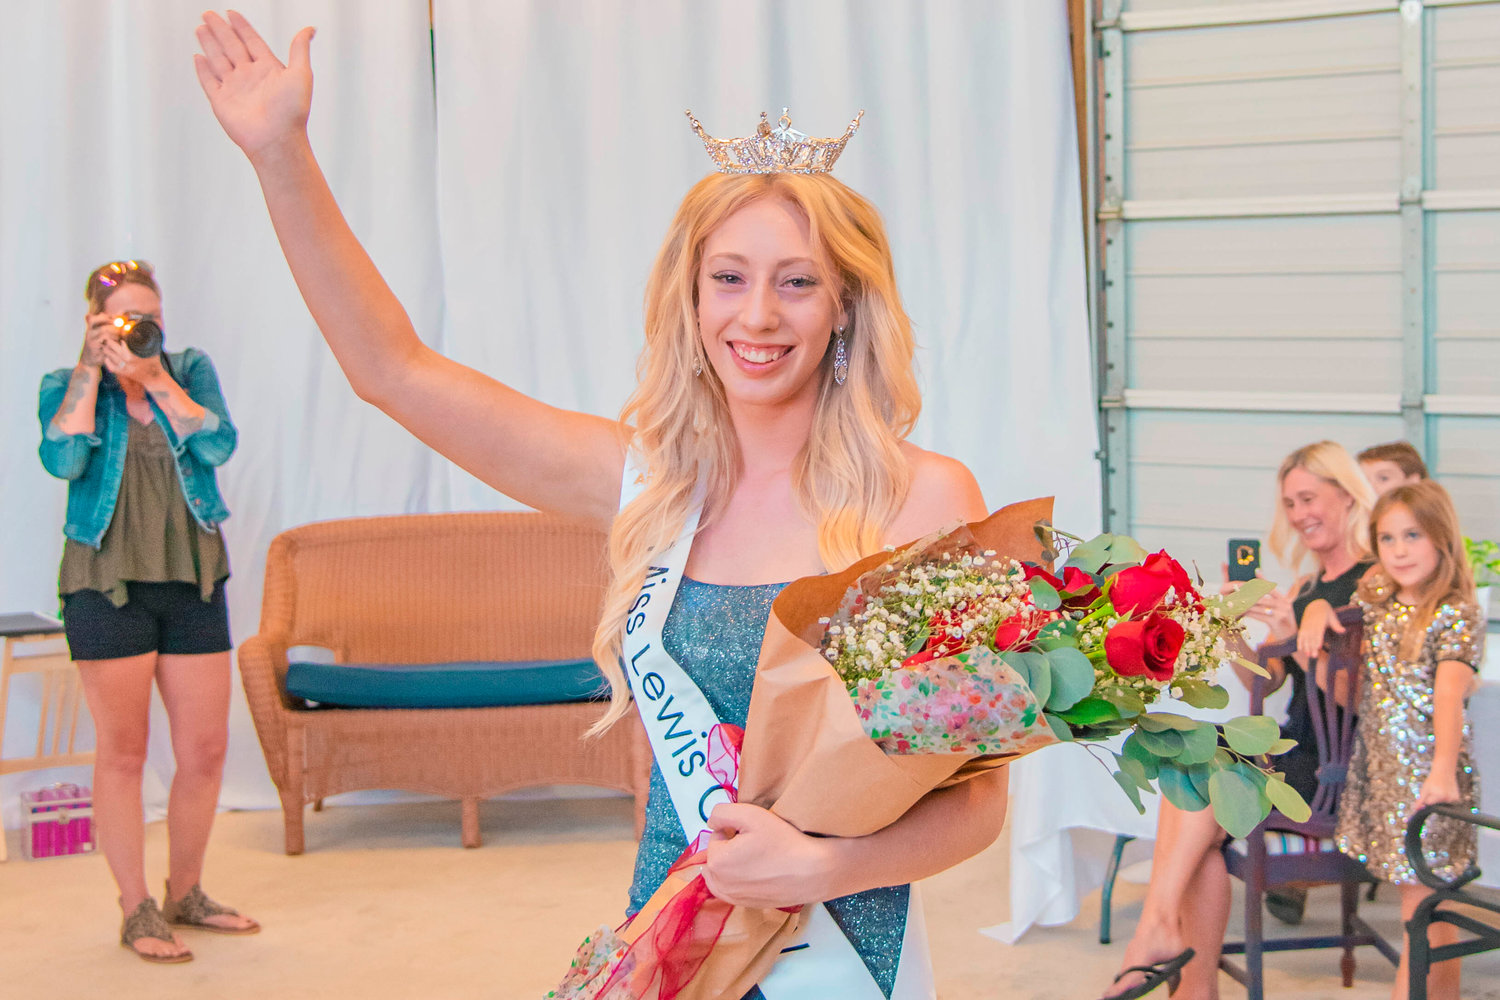 Sophie Moerke smiles and waves after being crowned Miss Lewis County during a ceremony in Chehalis on Monday.